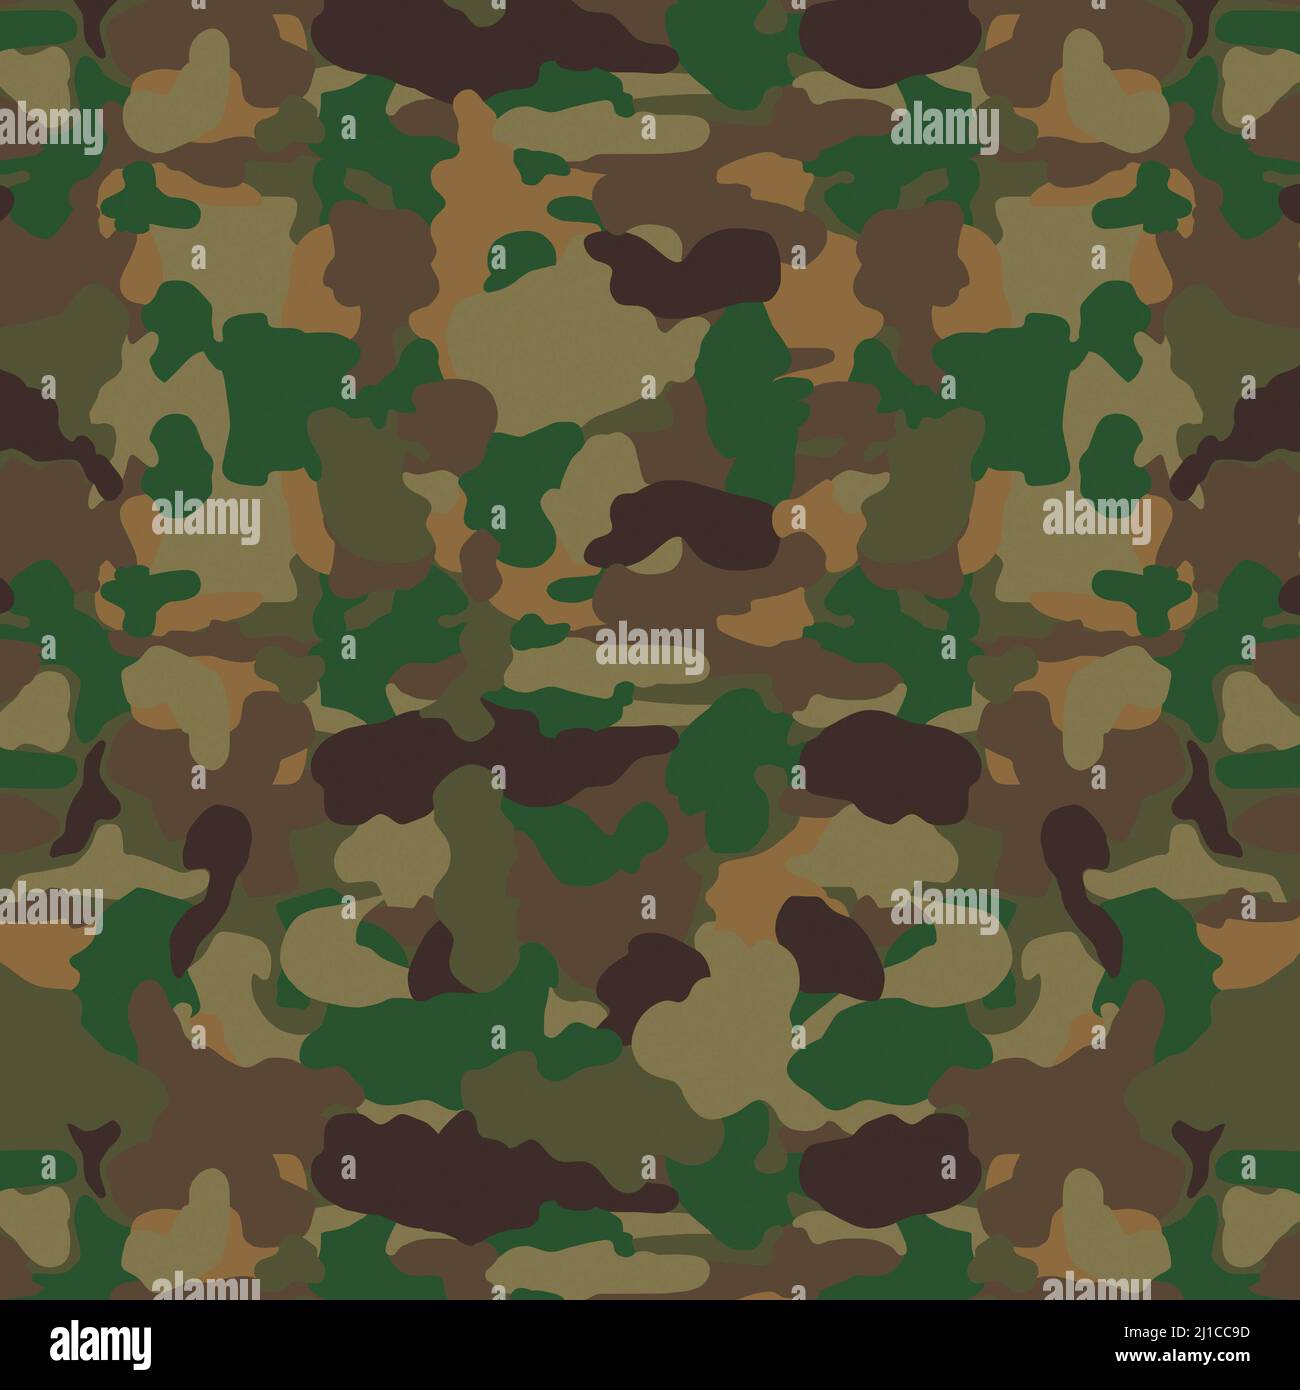 Royalty free camouflage pattern of different natural colors. Such camouflage pattern is mainly used in the military. In fashion there are these color Stock Photo